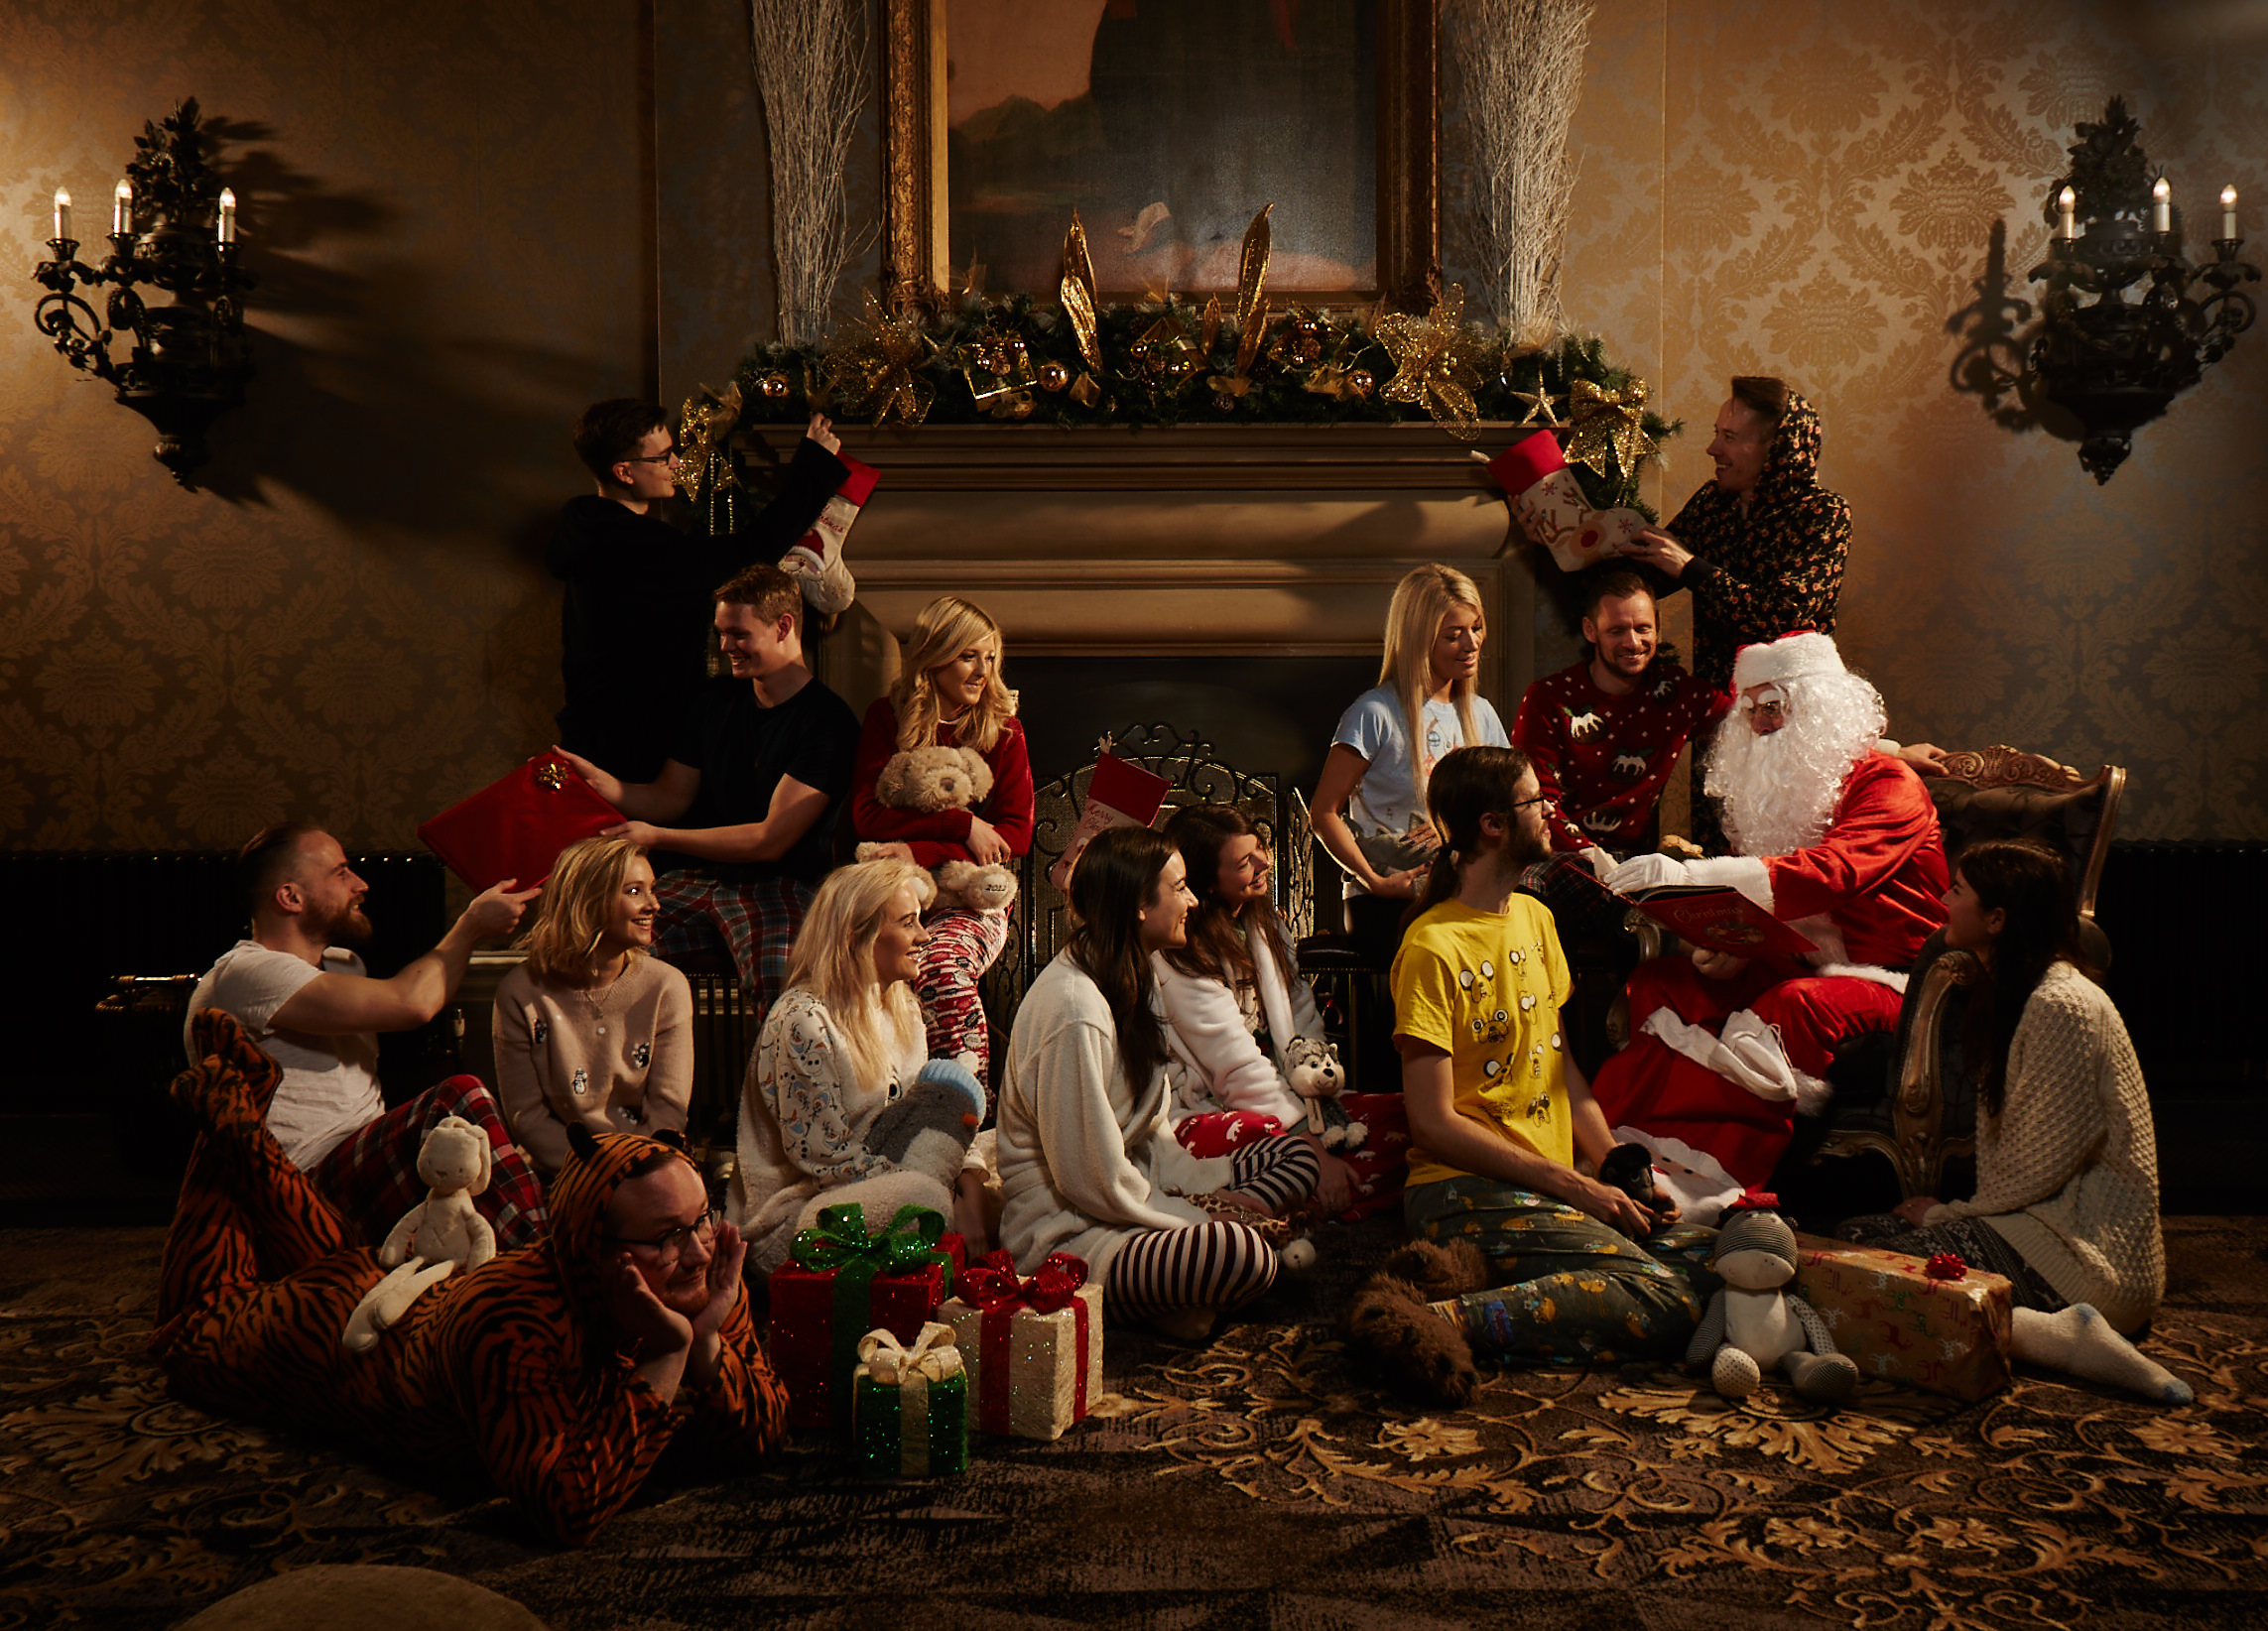 The Staff of We Are Boutique in Pyjamas Gathered Around Santa as he Reads a Story 